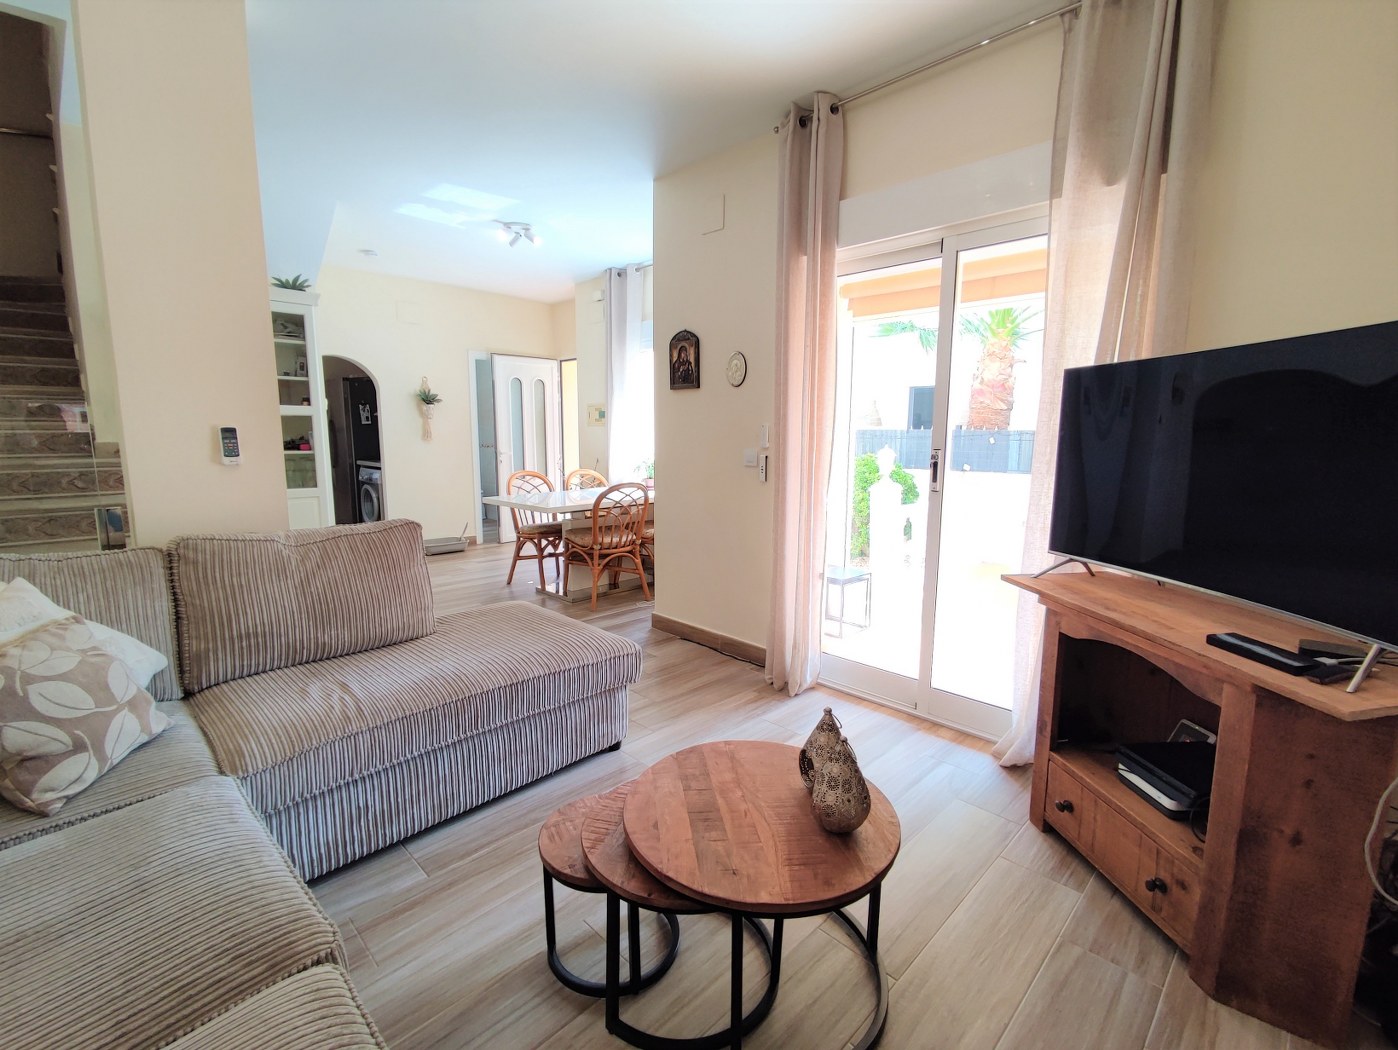 Semi-detached house for sale in Els Poblets